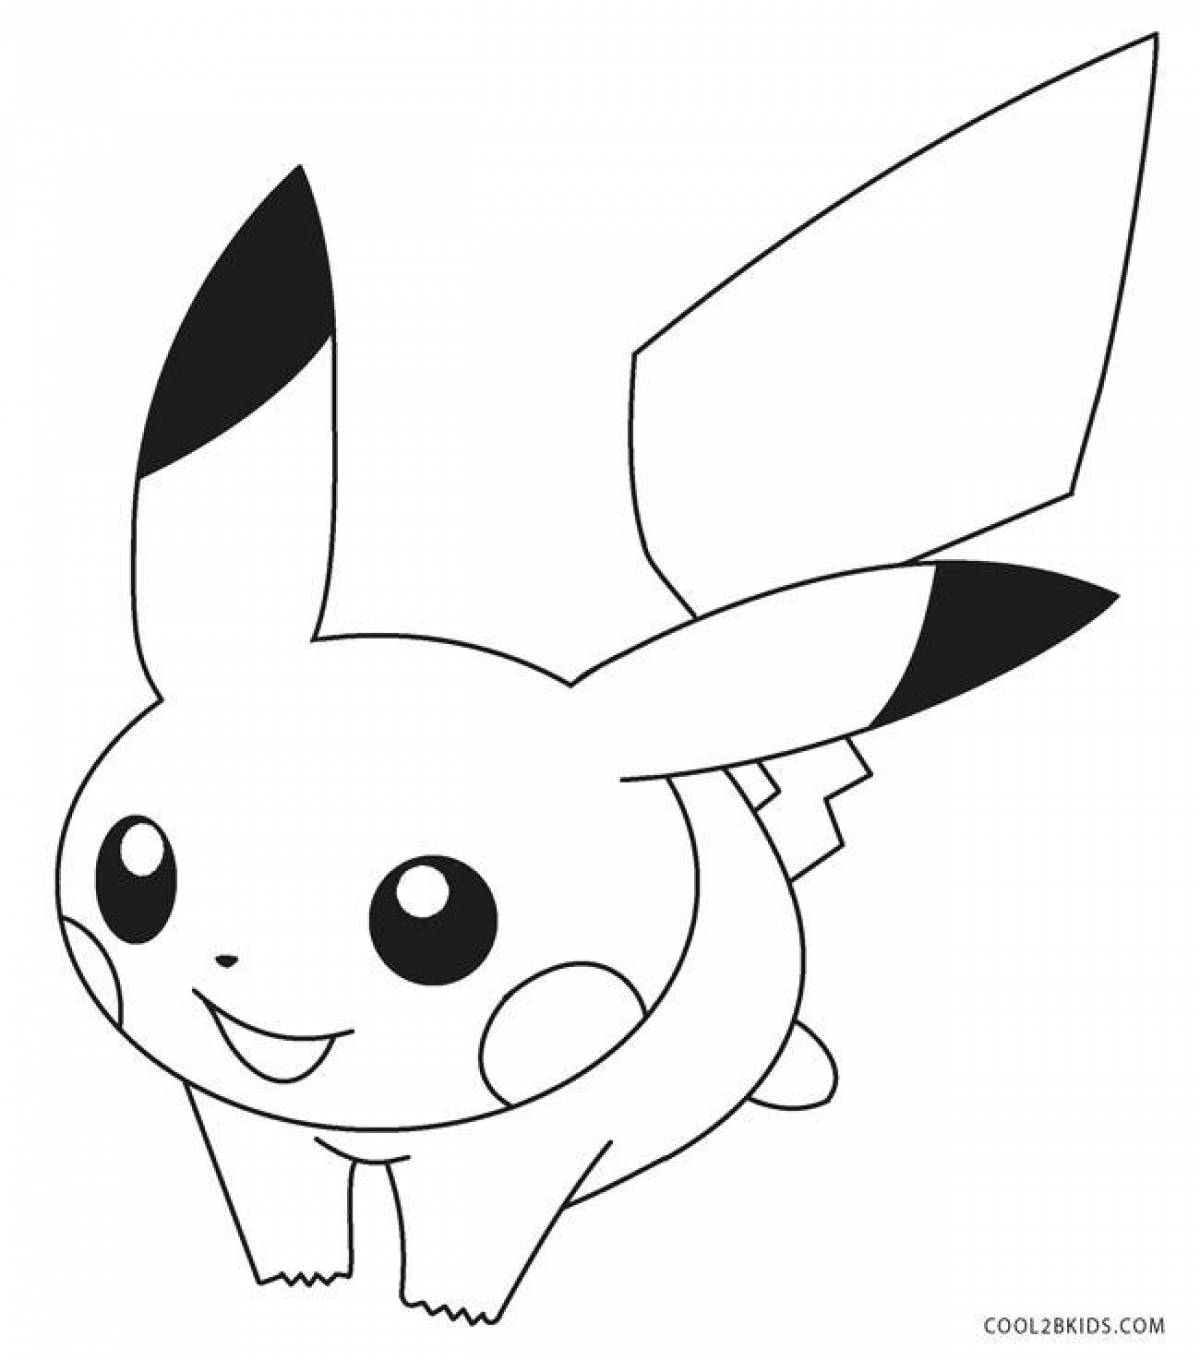 Blissful pikachu coloring book for kids